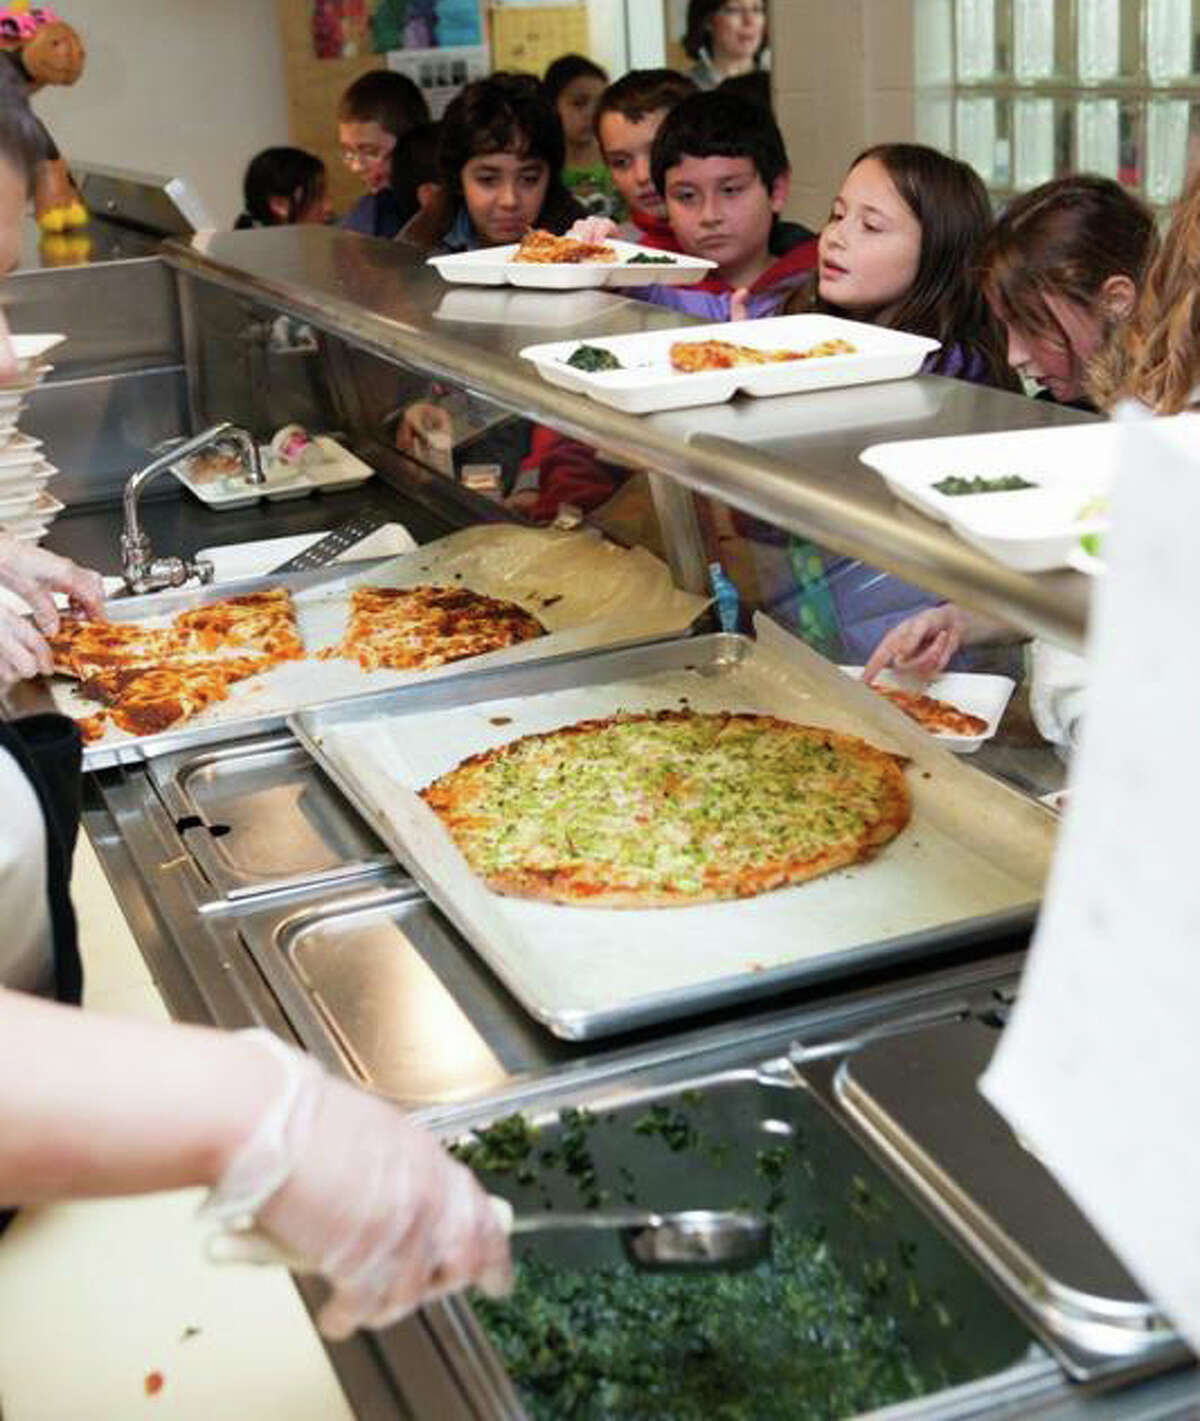 Students line up for lunch at McKinley School, one of two schools where new, healthier menus are being prepared and served under a pilot program this year.